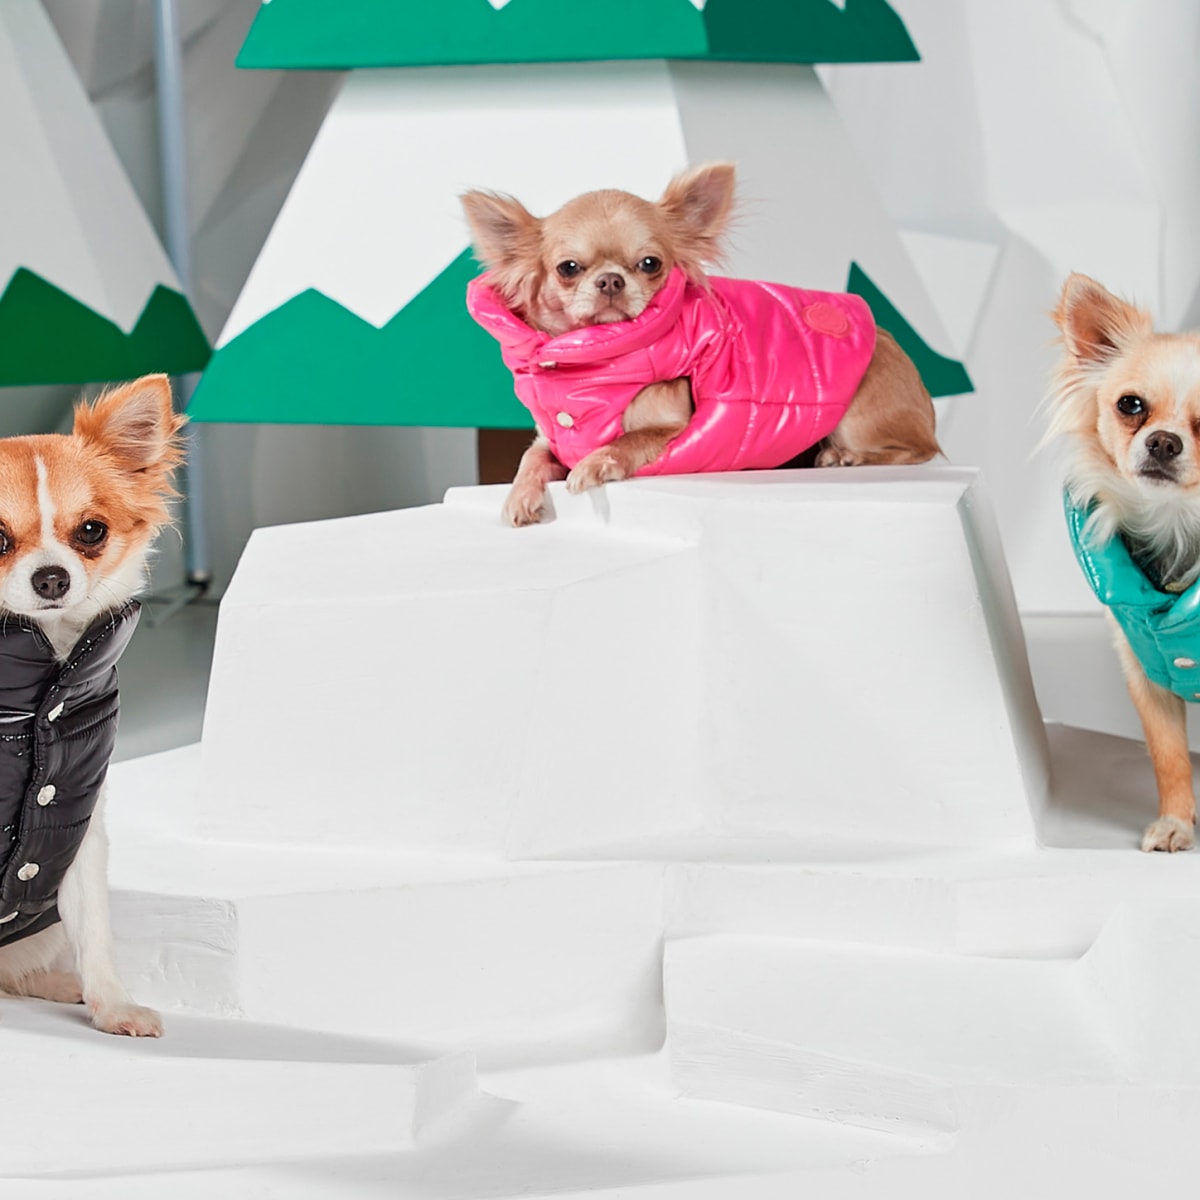 Do people buy expensive designer clothes for their dogs? - Quora